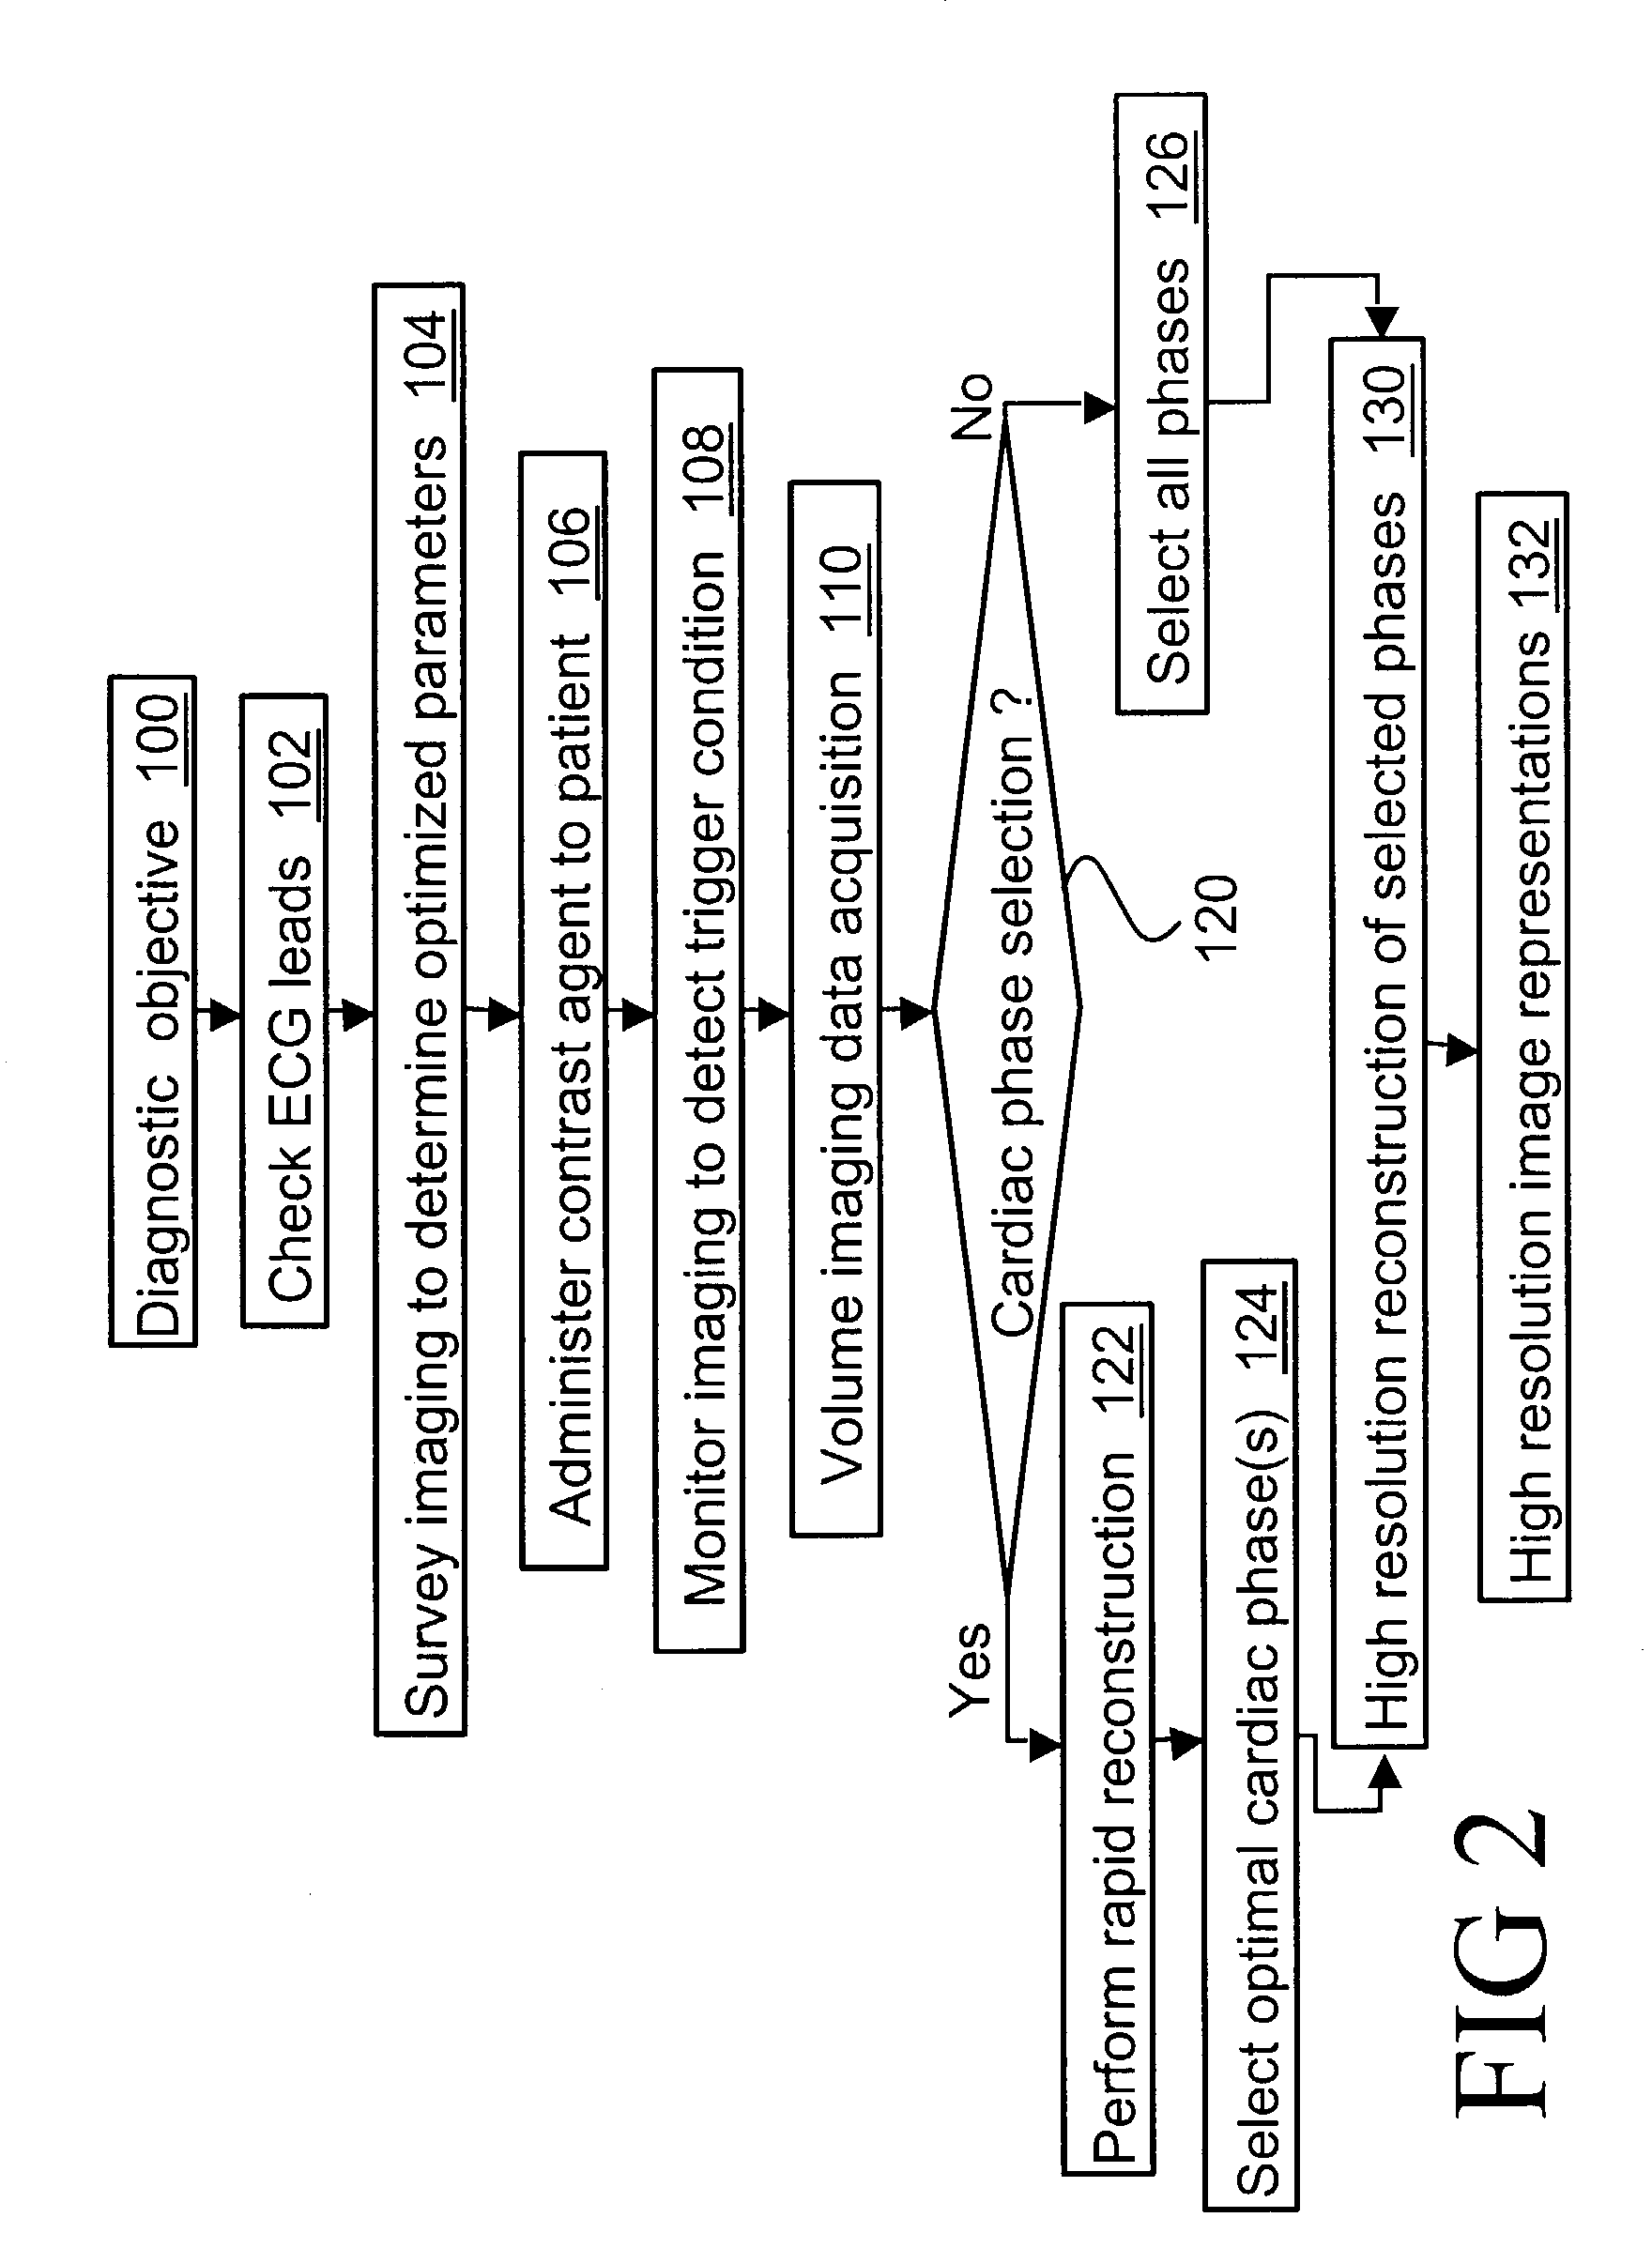 Method and apparatus for volumetric cardiac computed tomography imaging